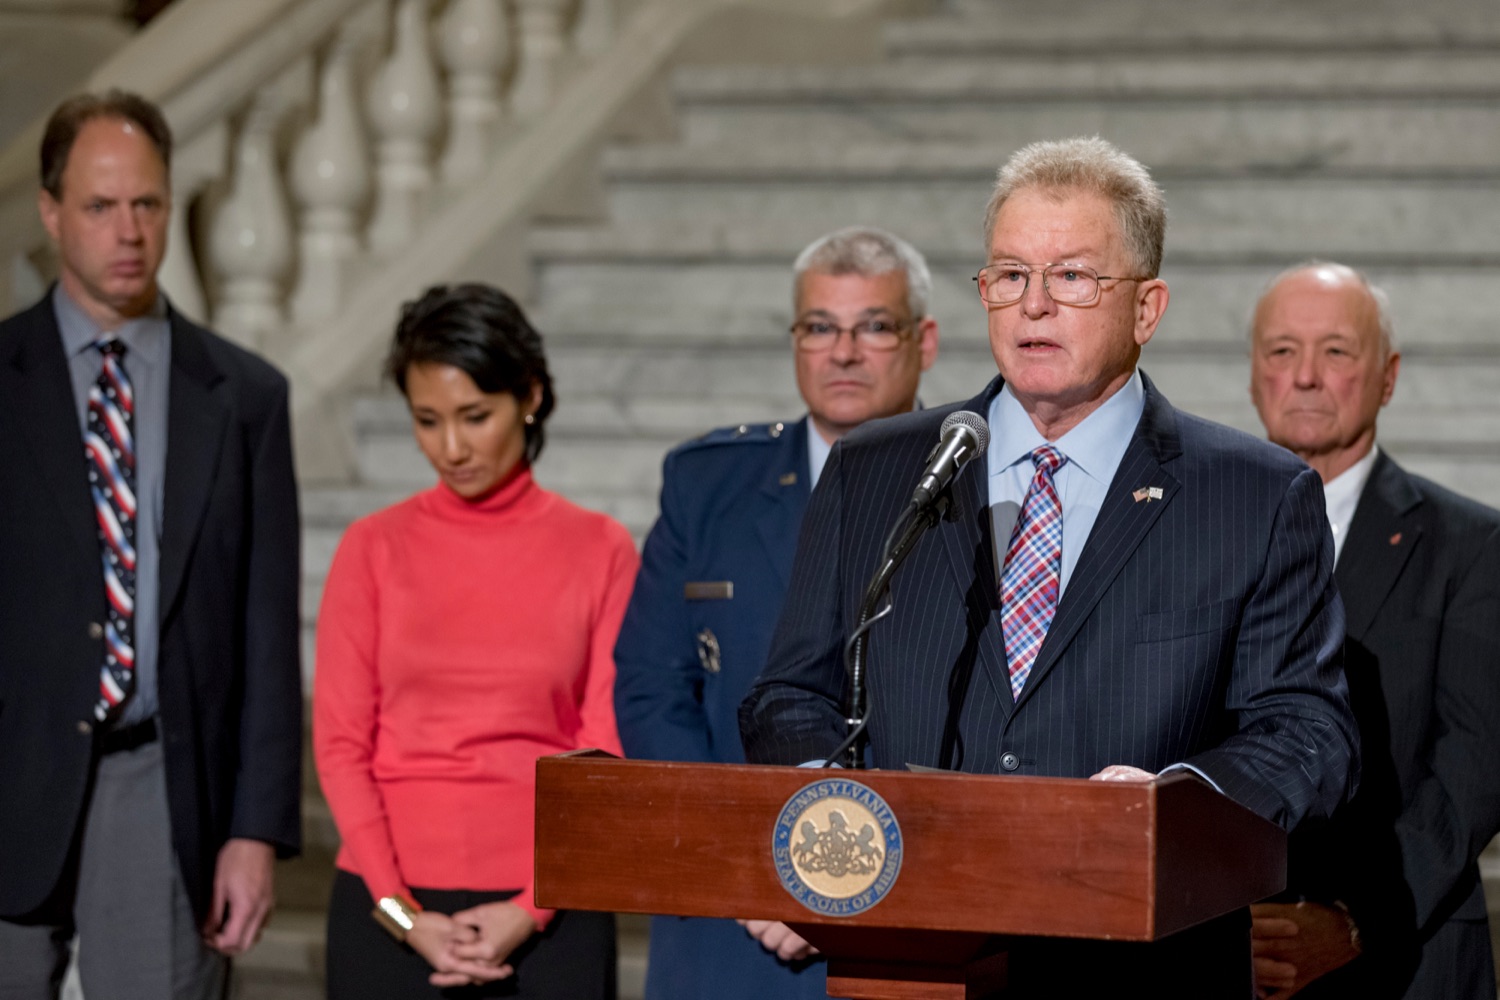 Rear Admiral Thomas Wilson, USN (Ret.), speaks during a press conference outlining how competition for qualified individuals among all employment sectors affects military recruiting efforts and warrants greater investment in our next generation inside the Capitol Rotunda on Tuesday, November 12, 2019.<br><a href="https://filesource.amperwave.net/commonwealthofpa/photo/17588_GOV_Mission_Readiness_NK_020.JPG" target="_blank">⇣ Download Photo</a>